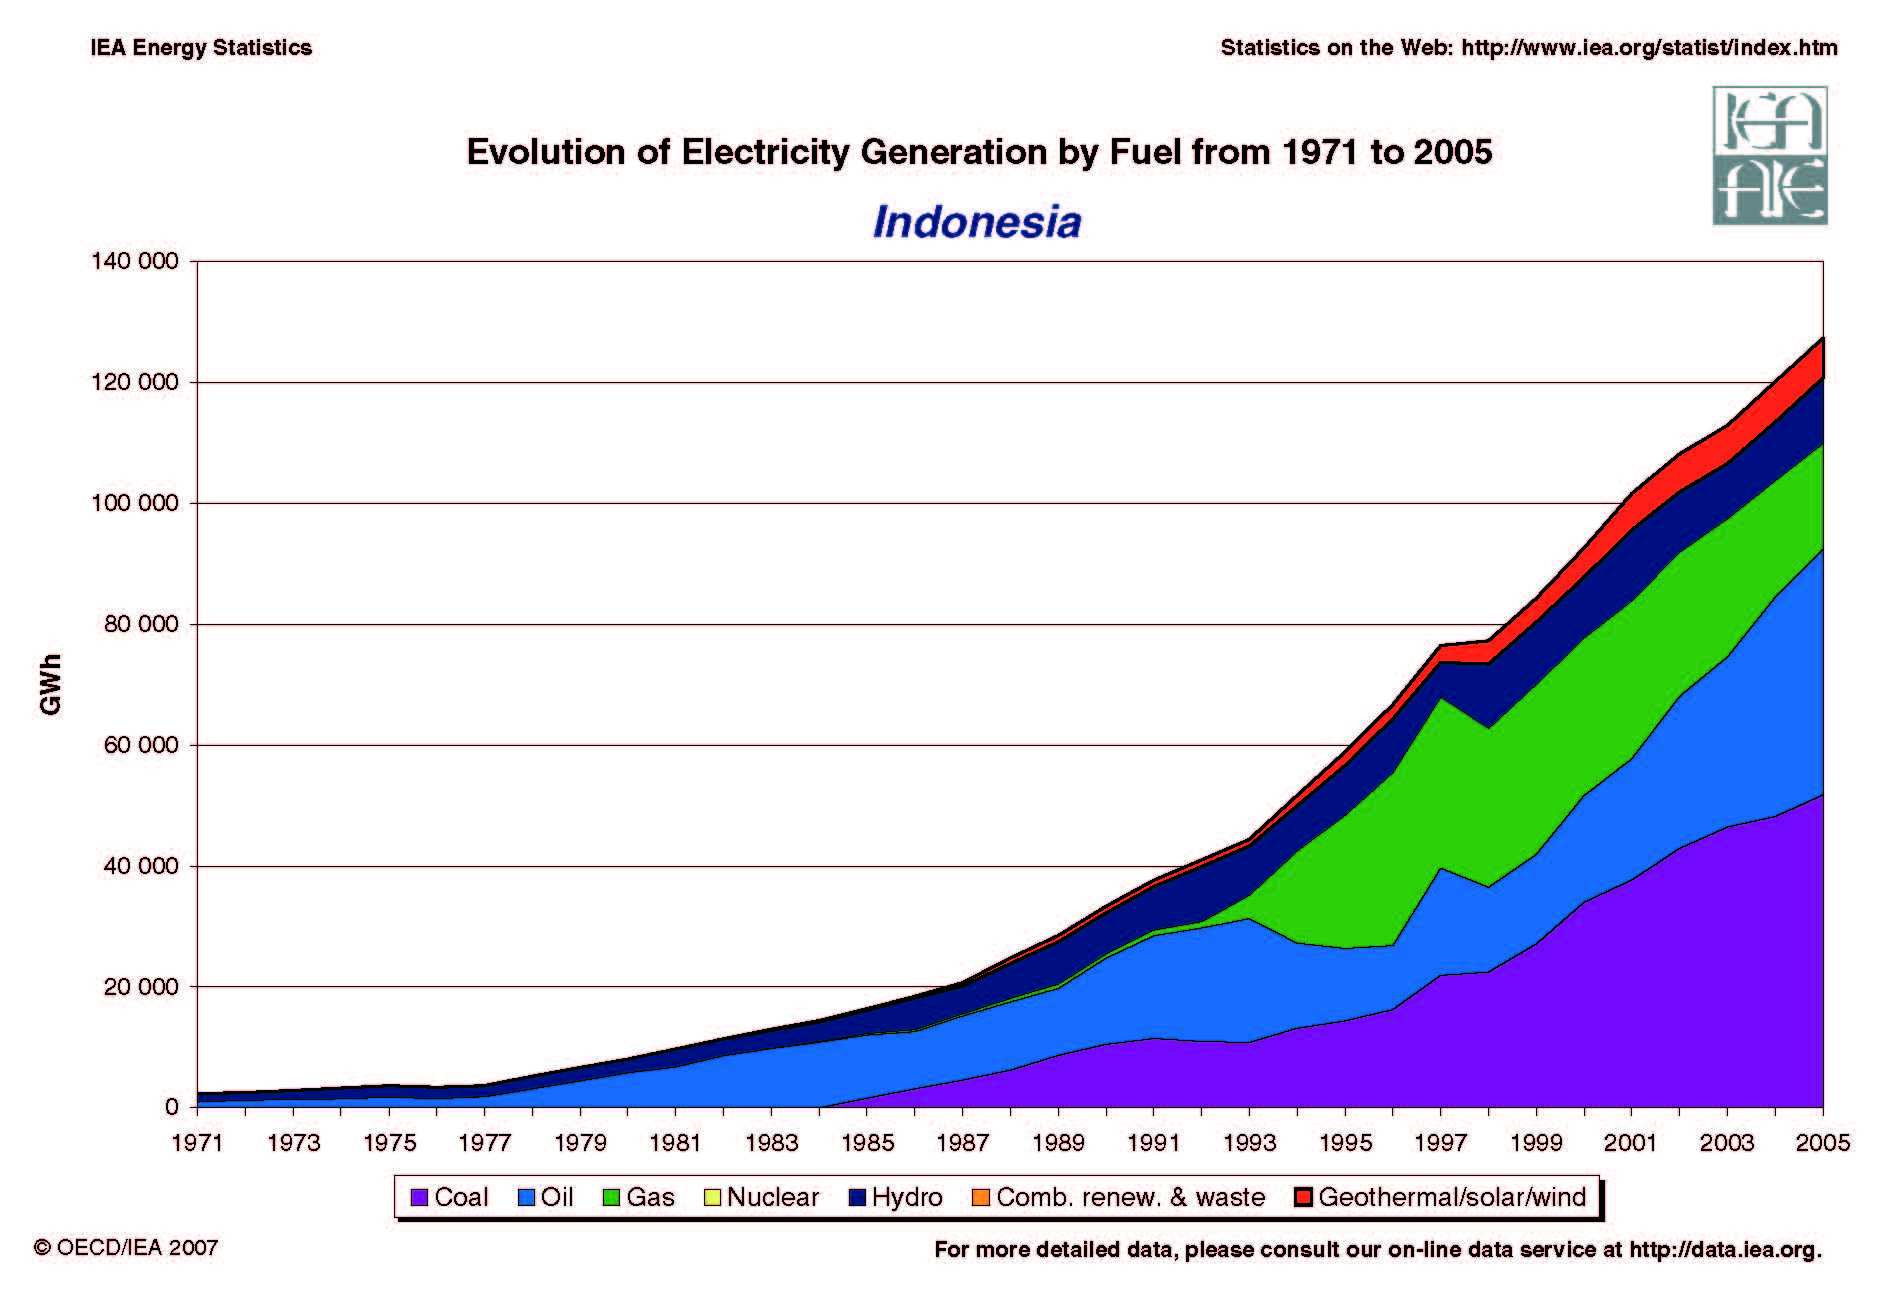 Indonesia Evolution of Electricity Generation by Fuel 1971 - 2005